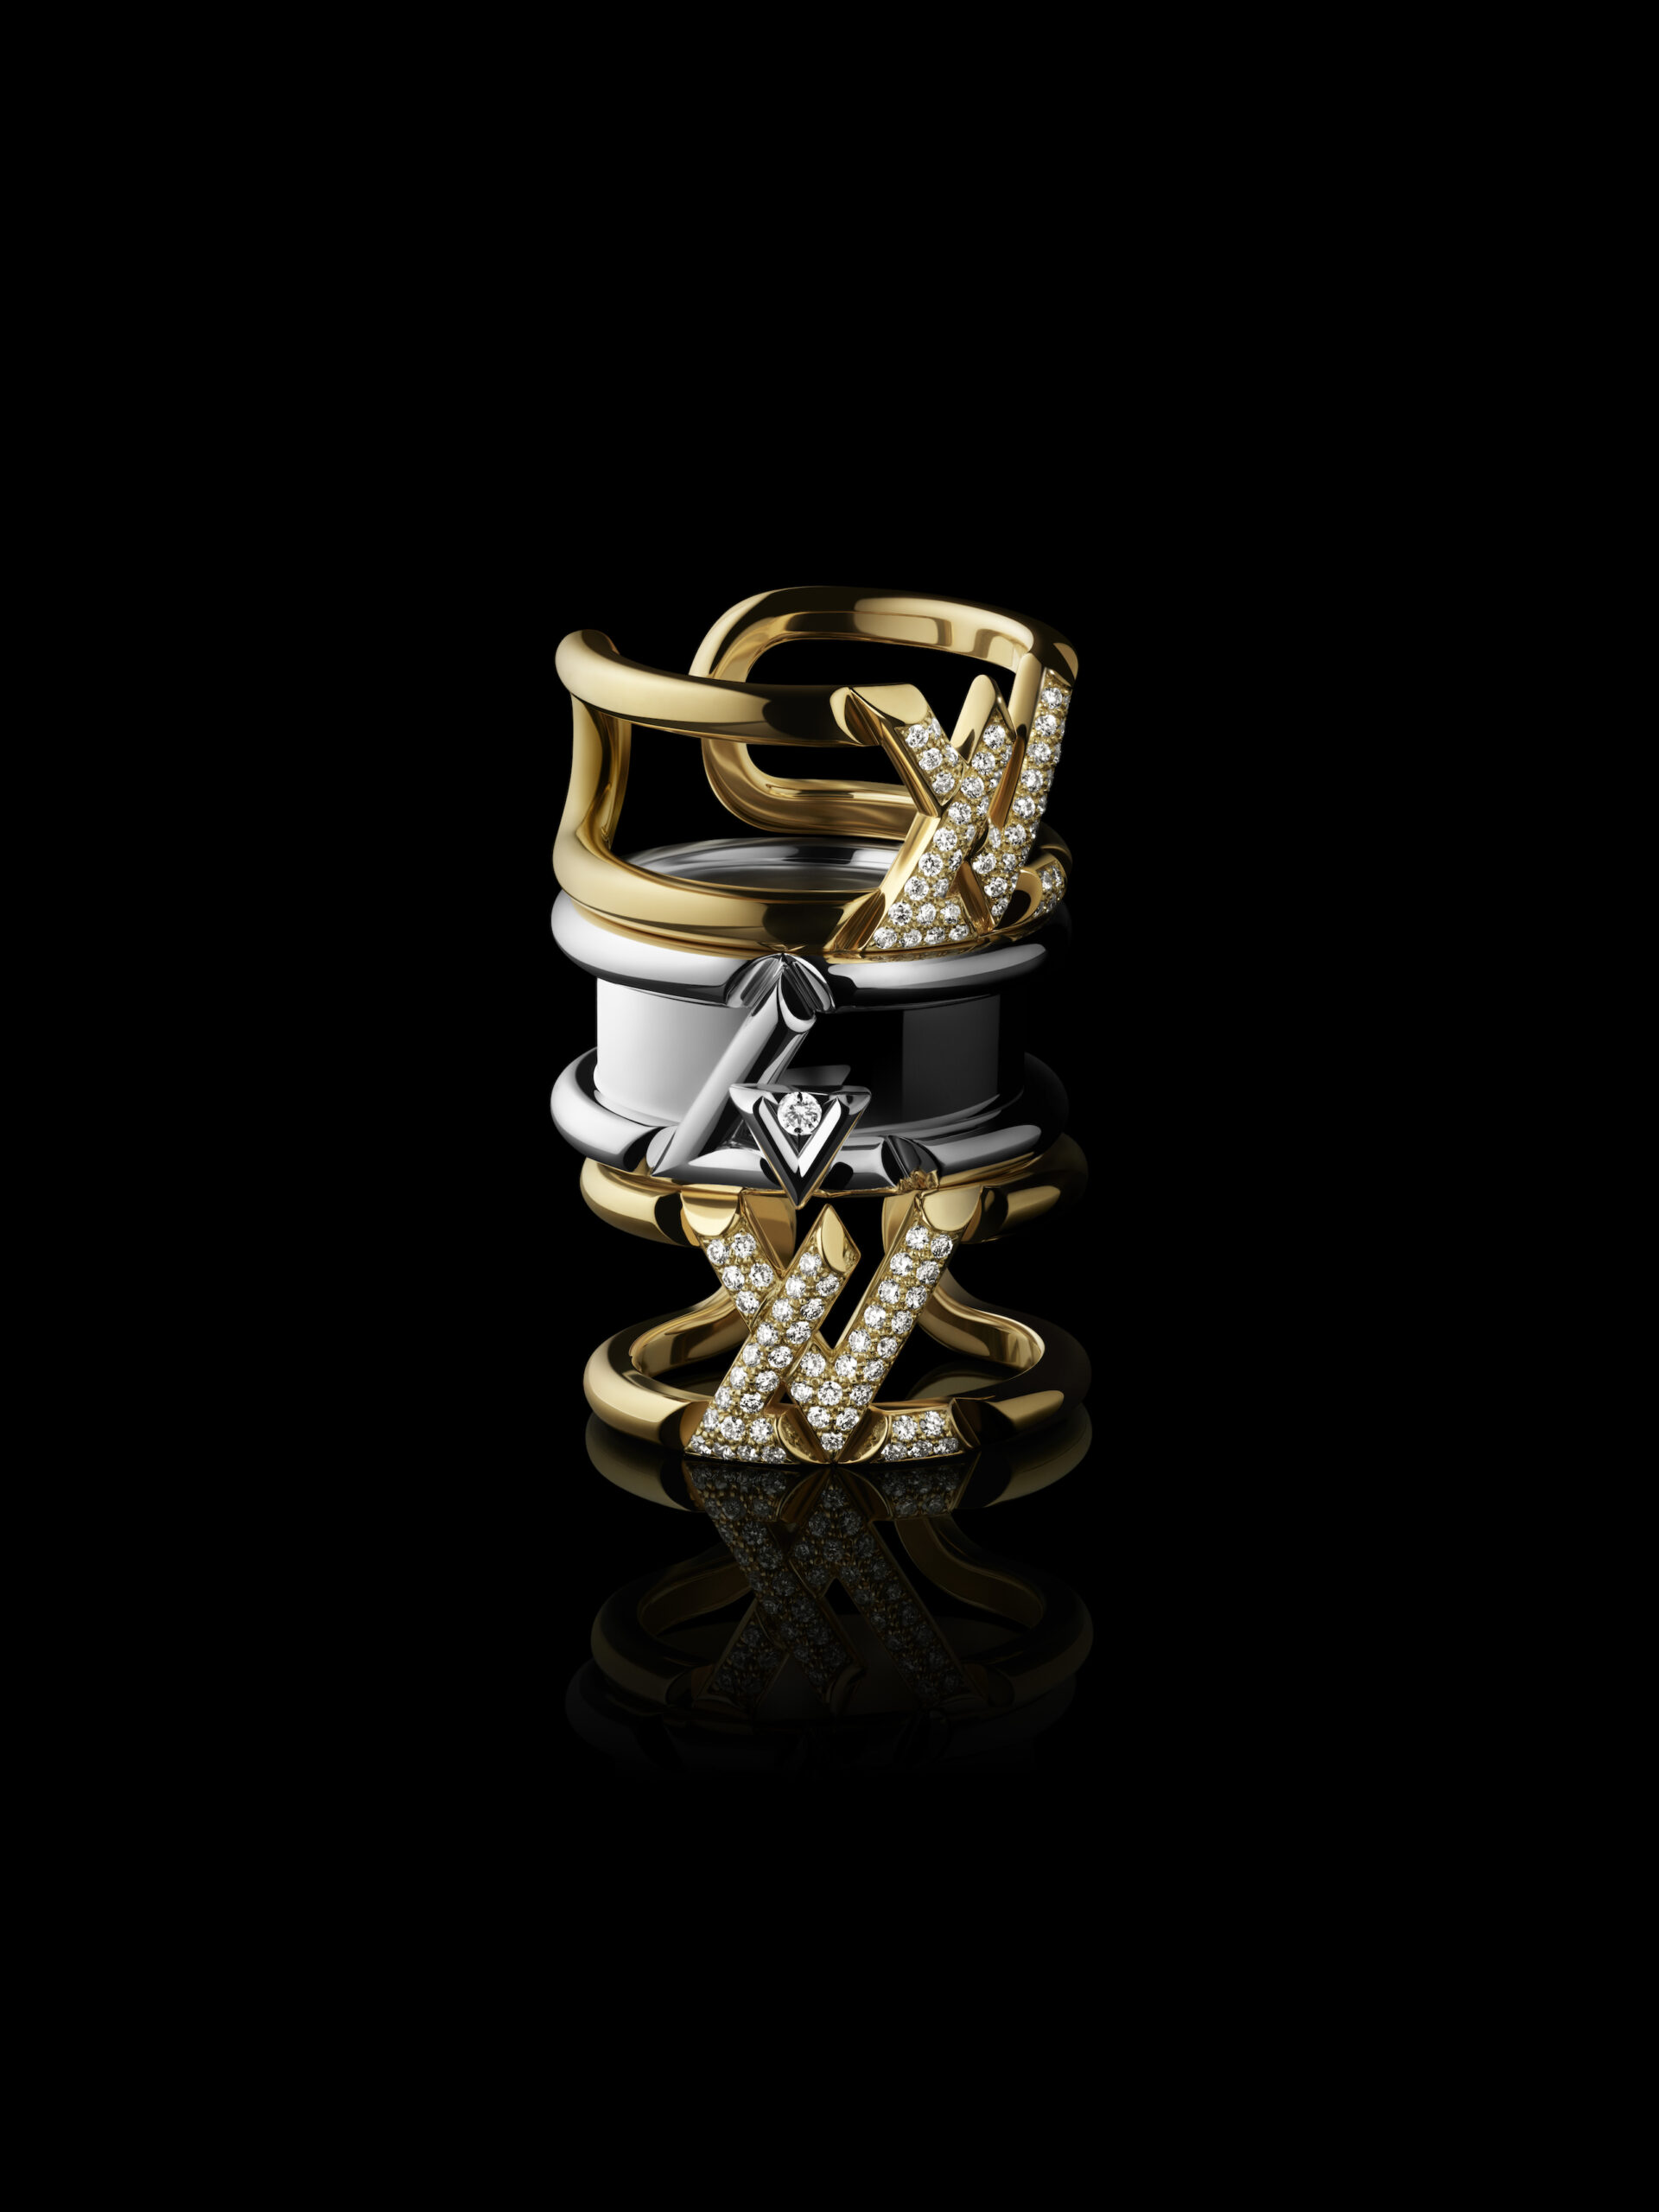 Louis Vuitton's Stylish New Fine Jewellery Collection Transcends